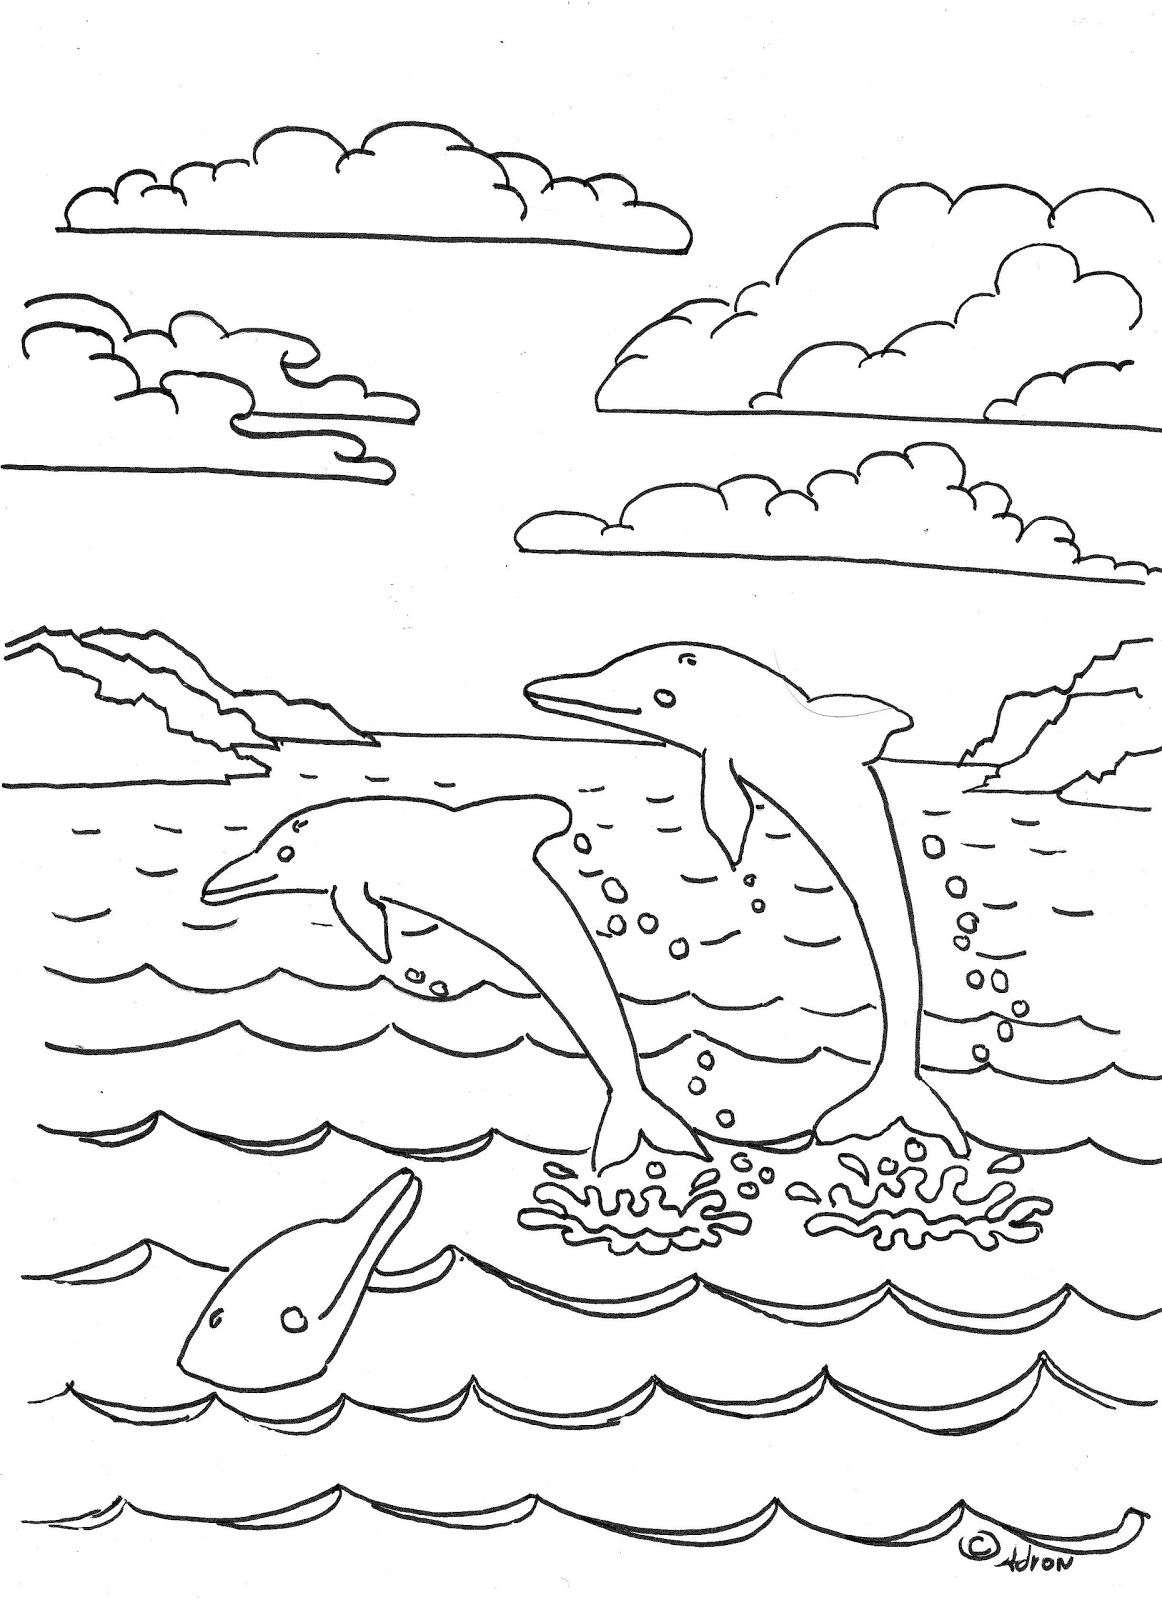 Coloring Pages for Kids by Mr. Adron: Dolphins Coloring Page Copy and Print